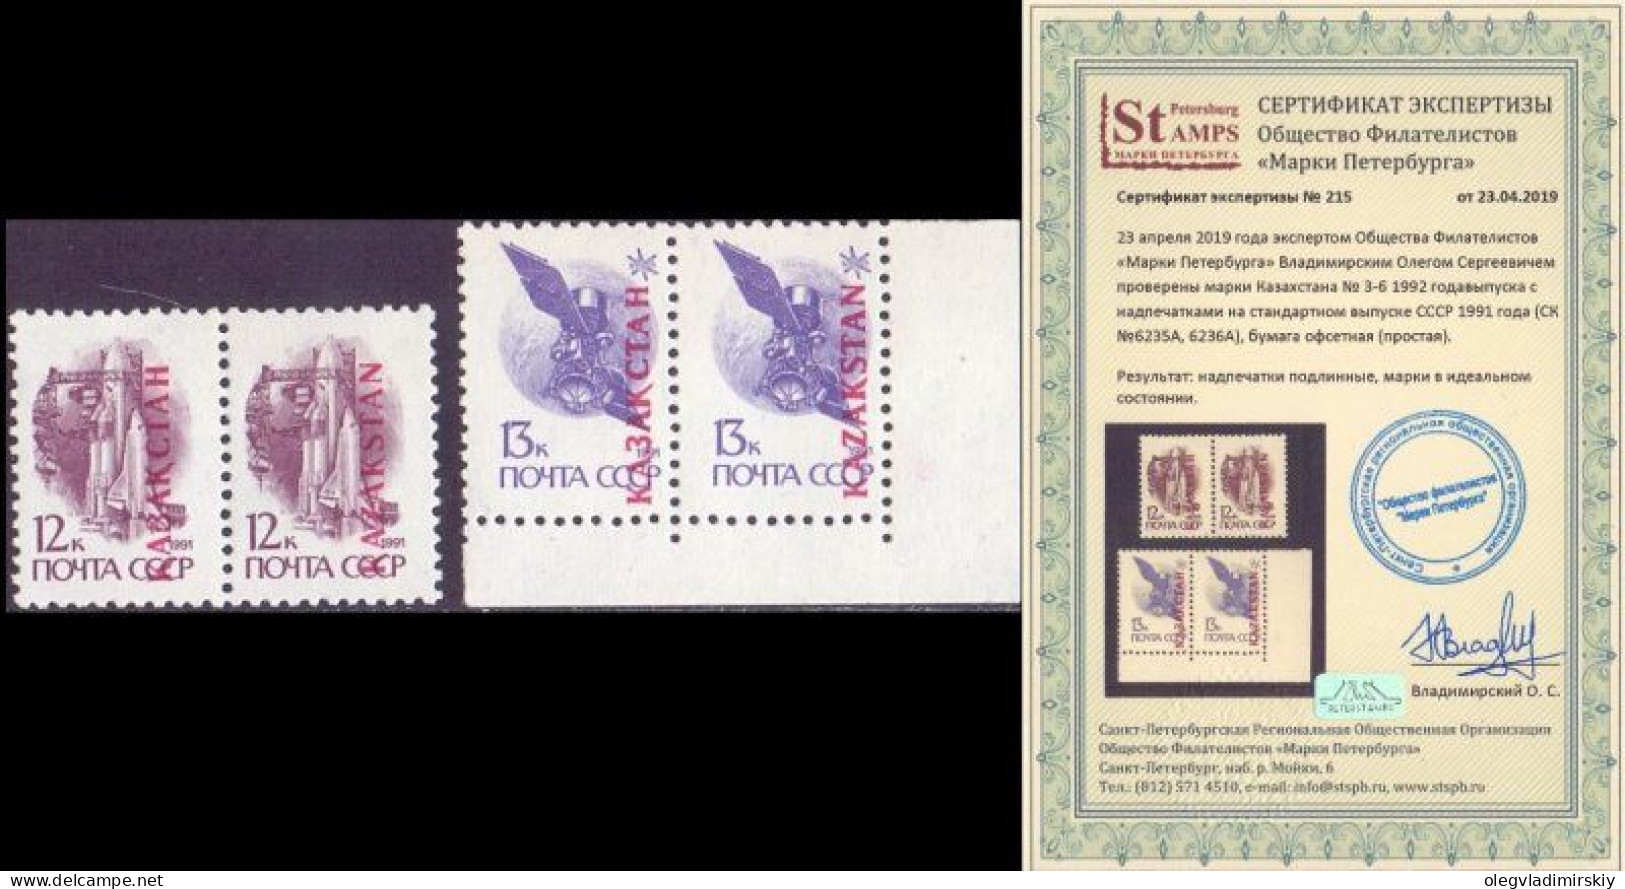 Kazakhstan 1992 Overprints On USSR Definitives Offset Paper Set Of 2 Strips Of 2 Stamps With Certificate Of Authenticity - Kazakhstan